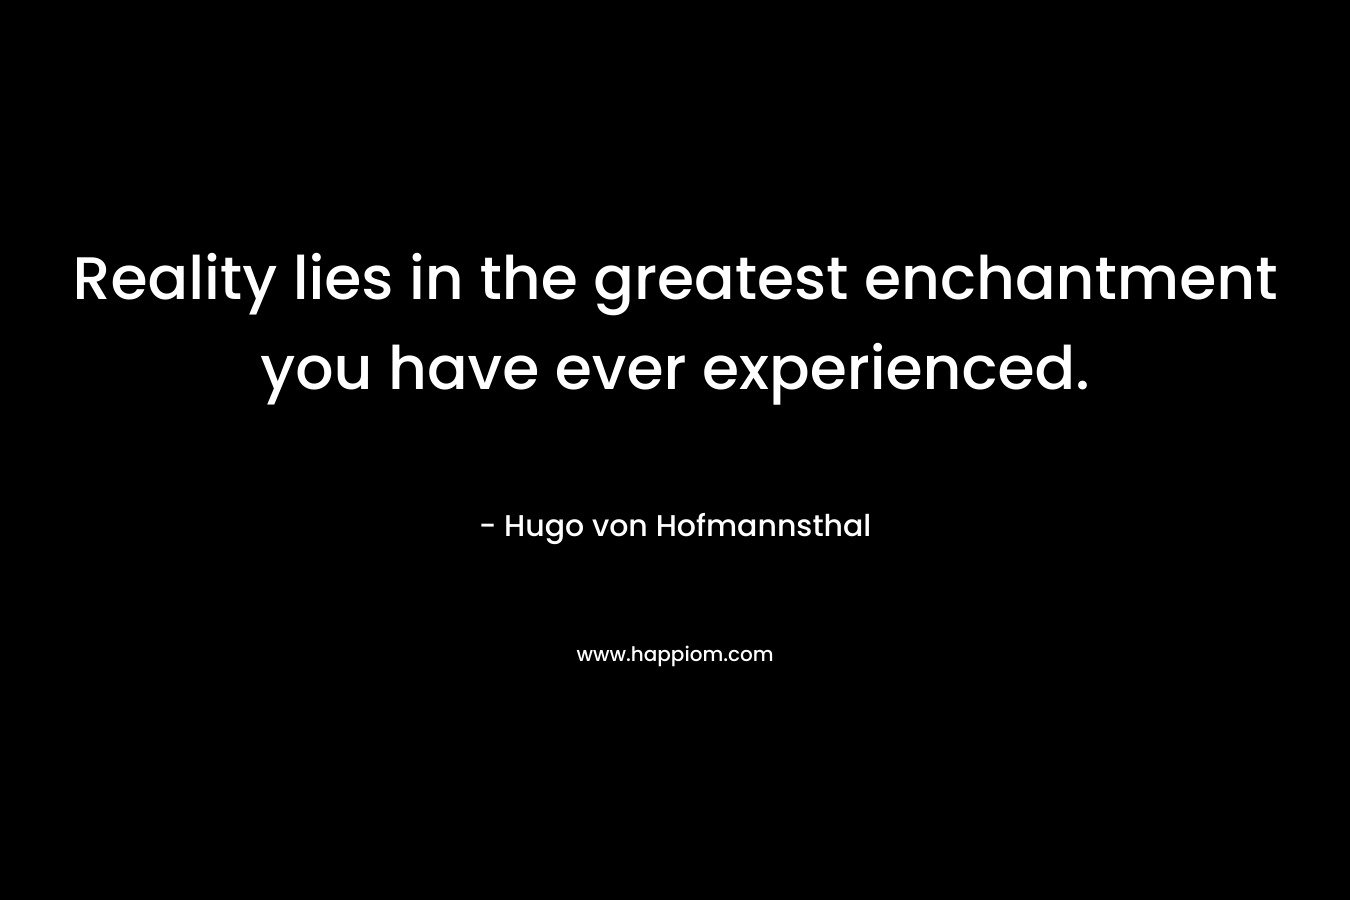 Reality lies in the greatest enchantment you have ever experienced.